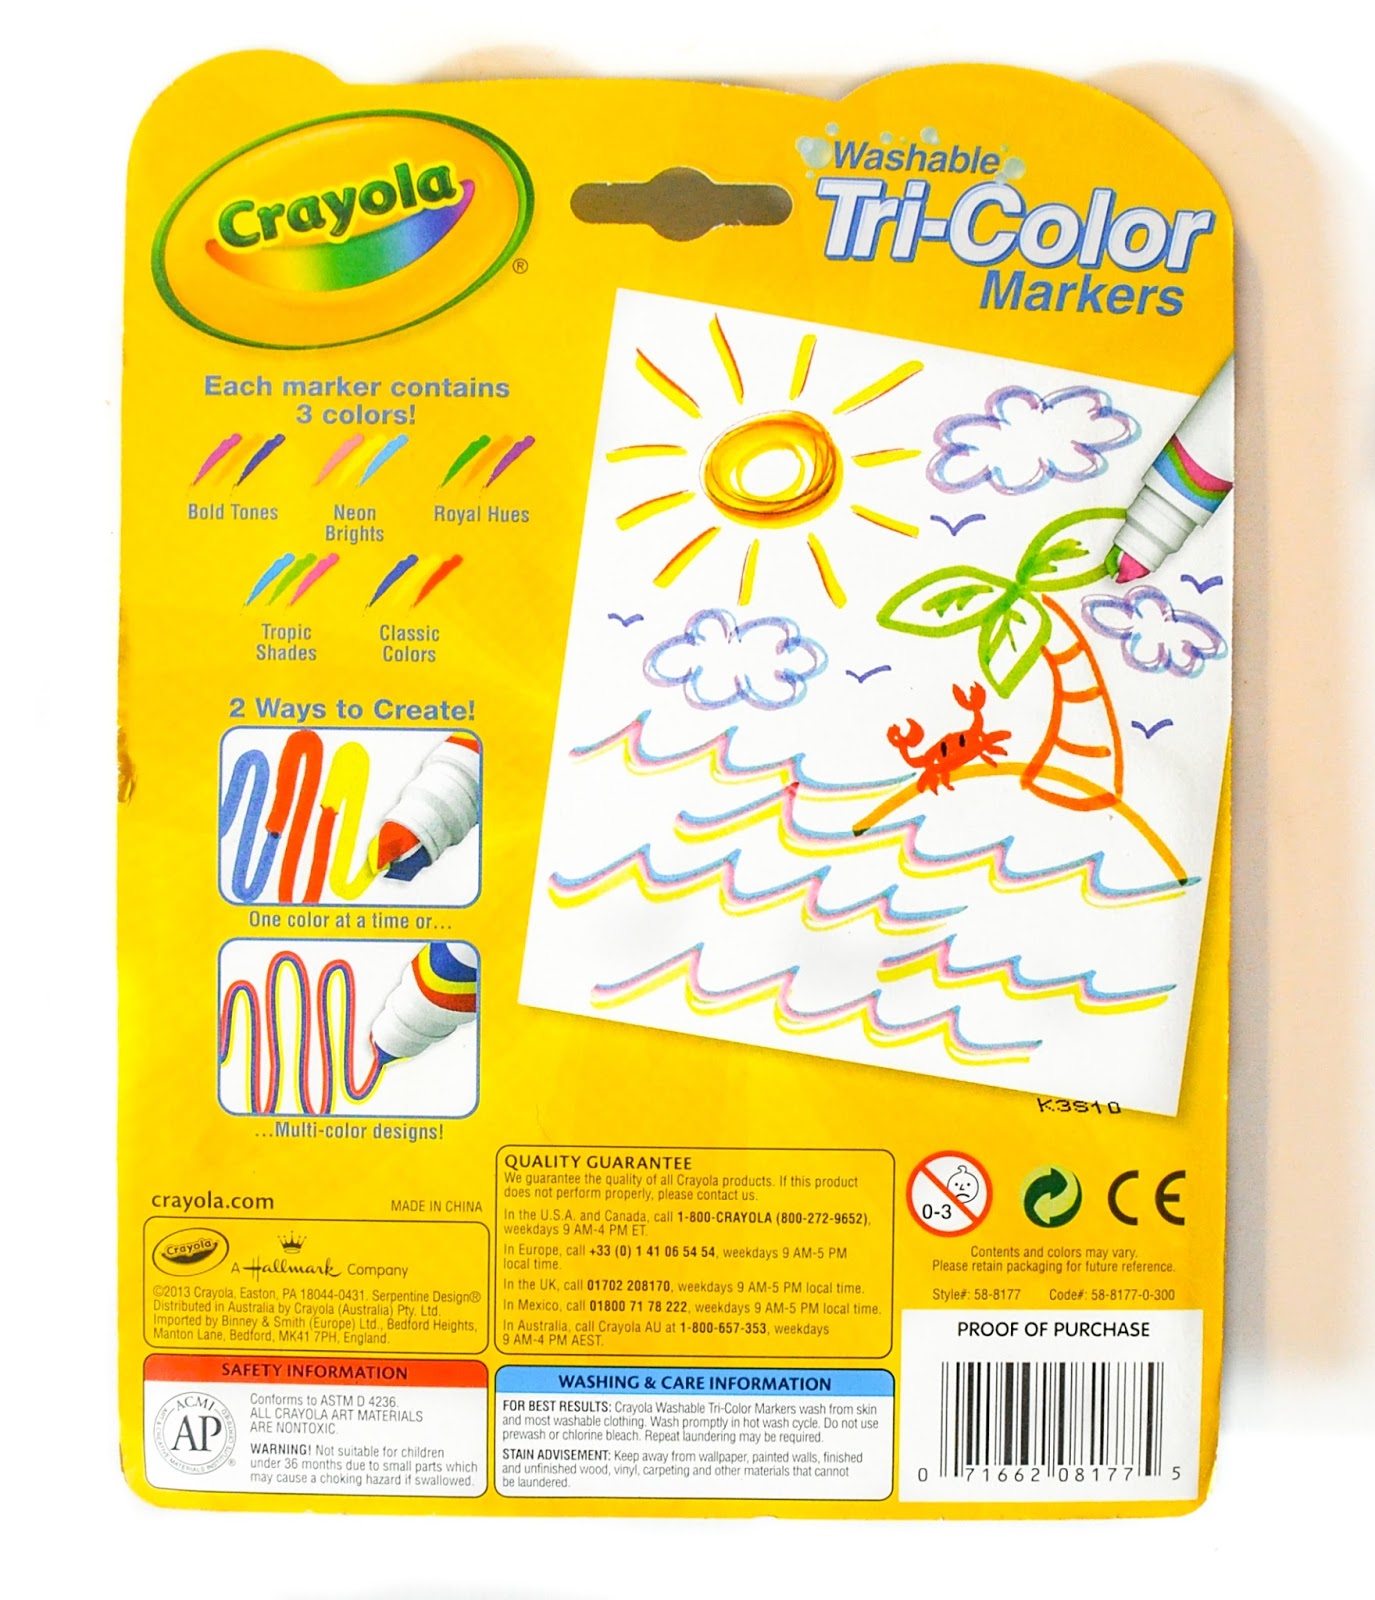 Melissa and Doug Learning Mat Crayons: What's Inside the Box